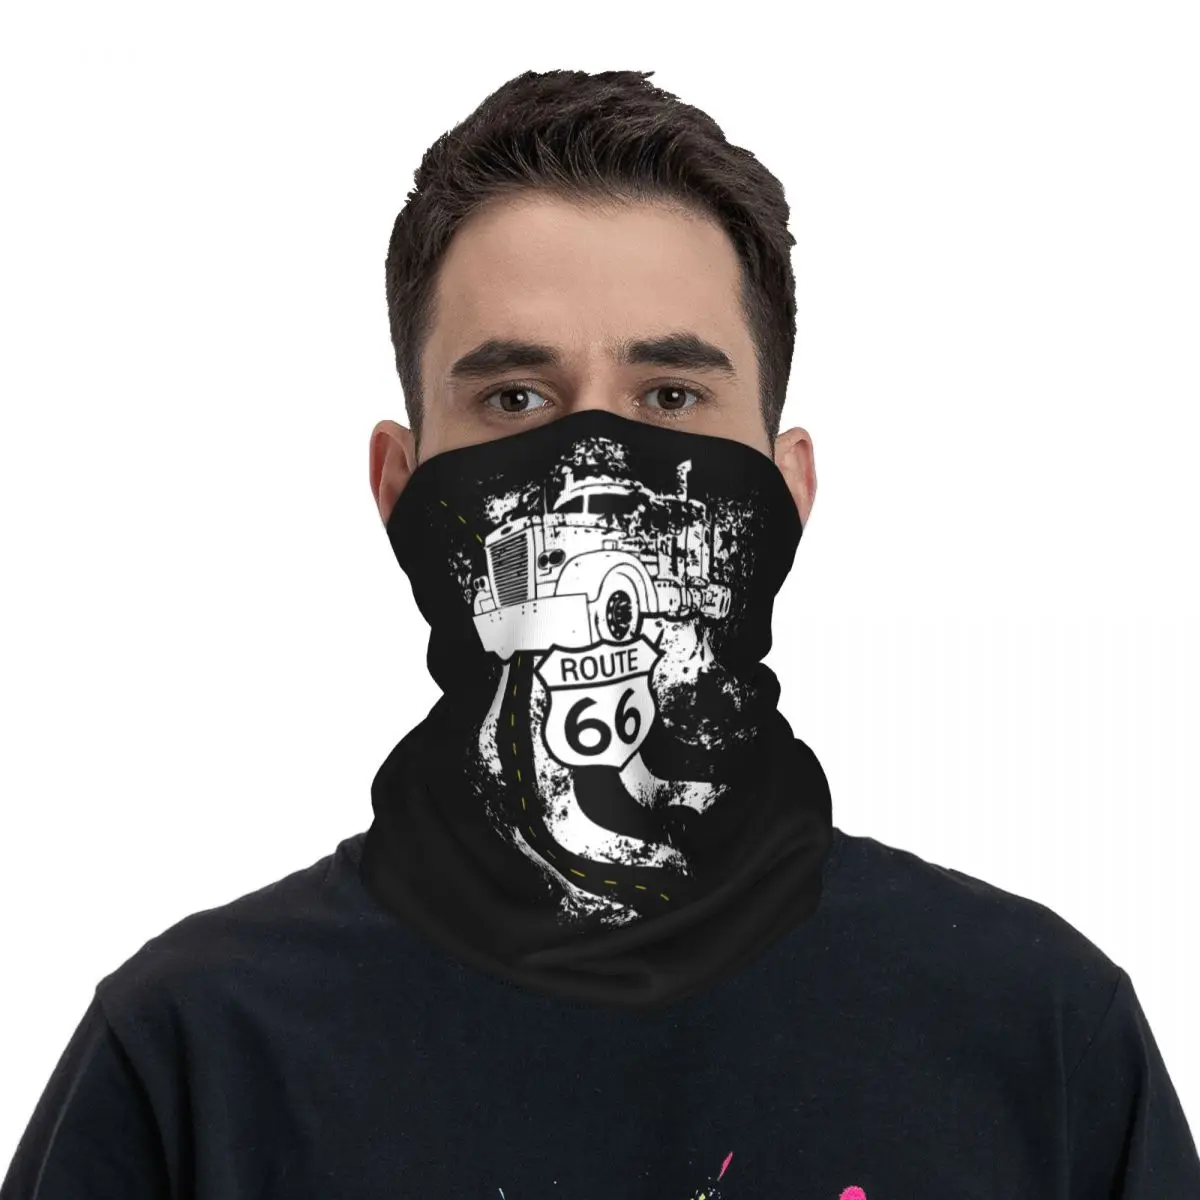 

Route 66 Big Rig Truck US Flag Bandana Neck Cover America Highway Mask Scarf Multi-use Cycling Scarf Fishing Unisex Winter